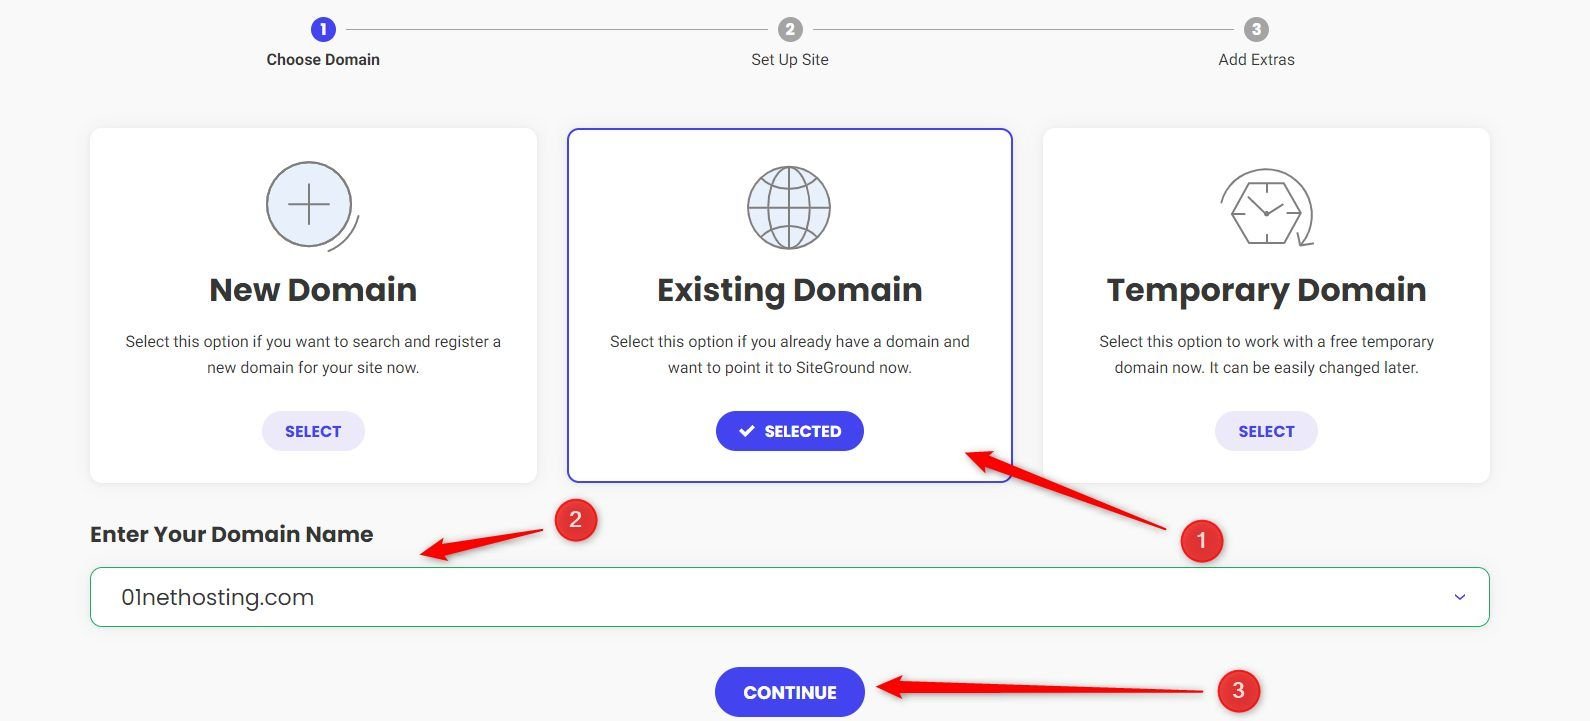 Select Existing Domain